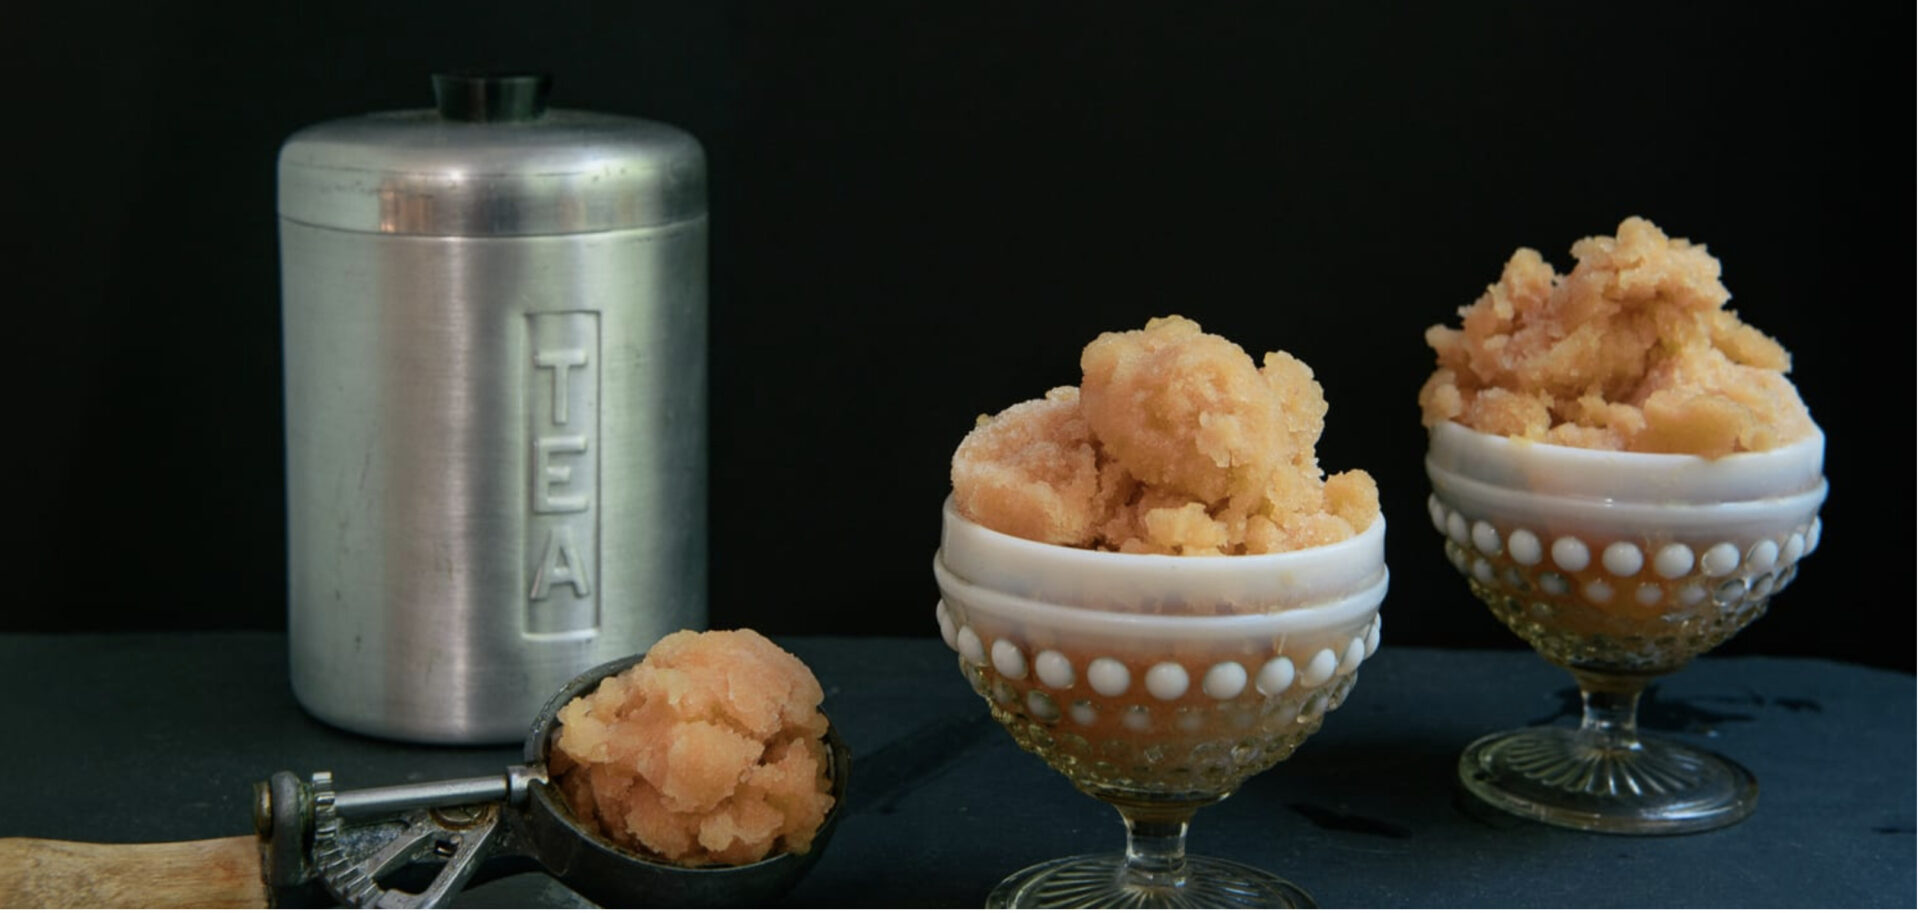 Goblets and a scooper of peach iced tea sorbet, one of five no-bake dessert options